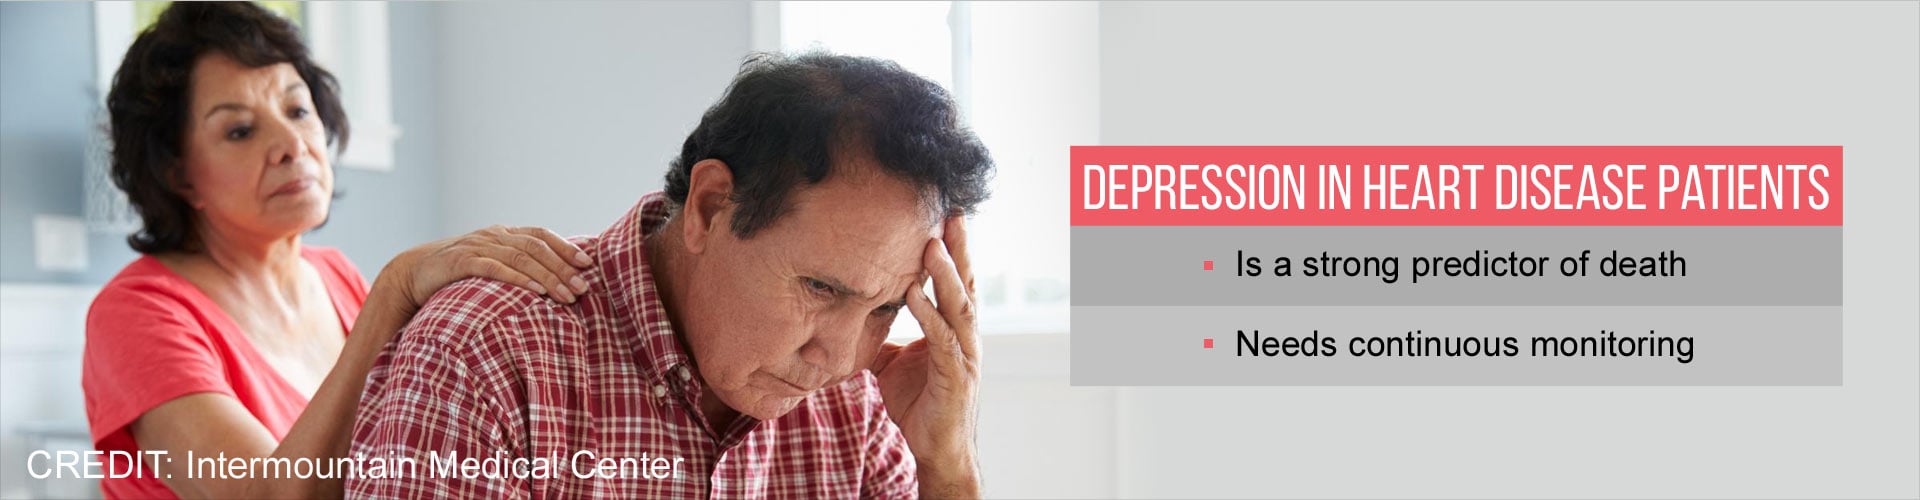 Depression in heart disease patients
- is a strong predictor of death
- needs continuous monitoring